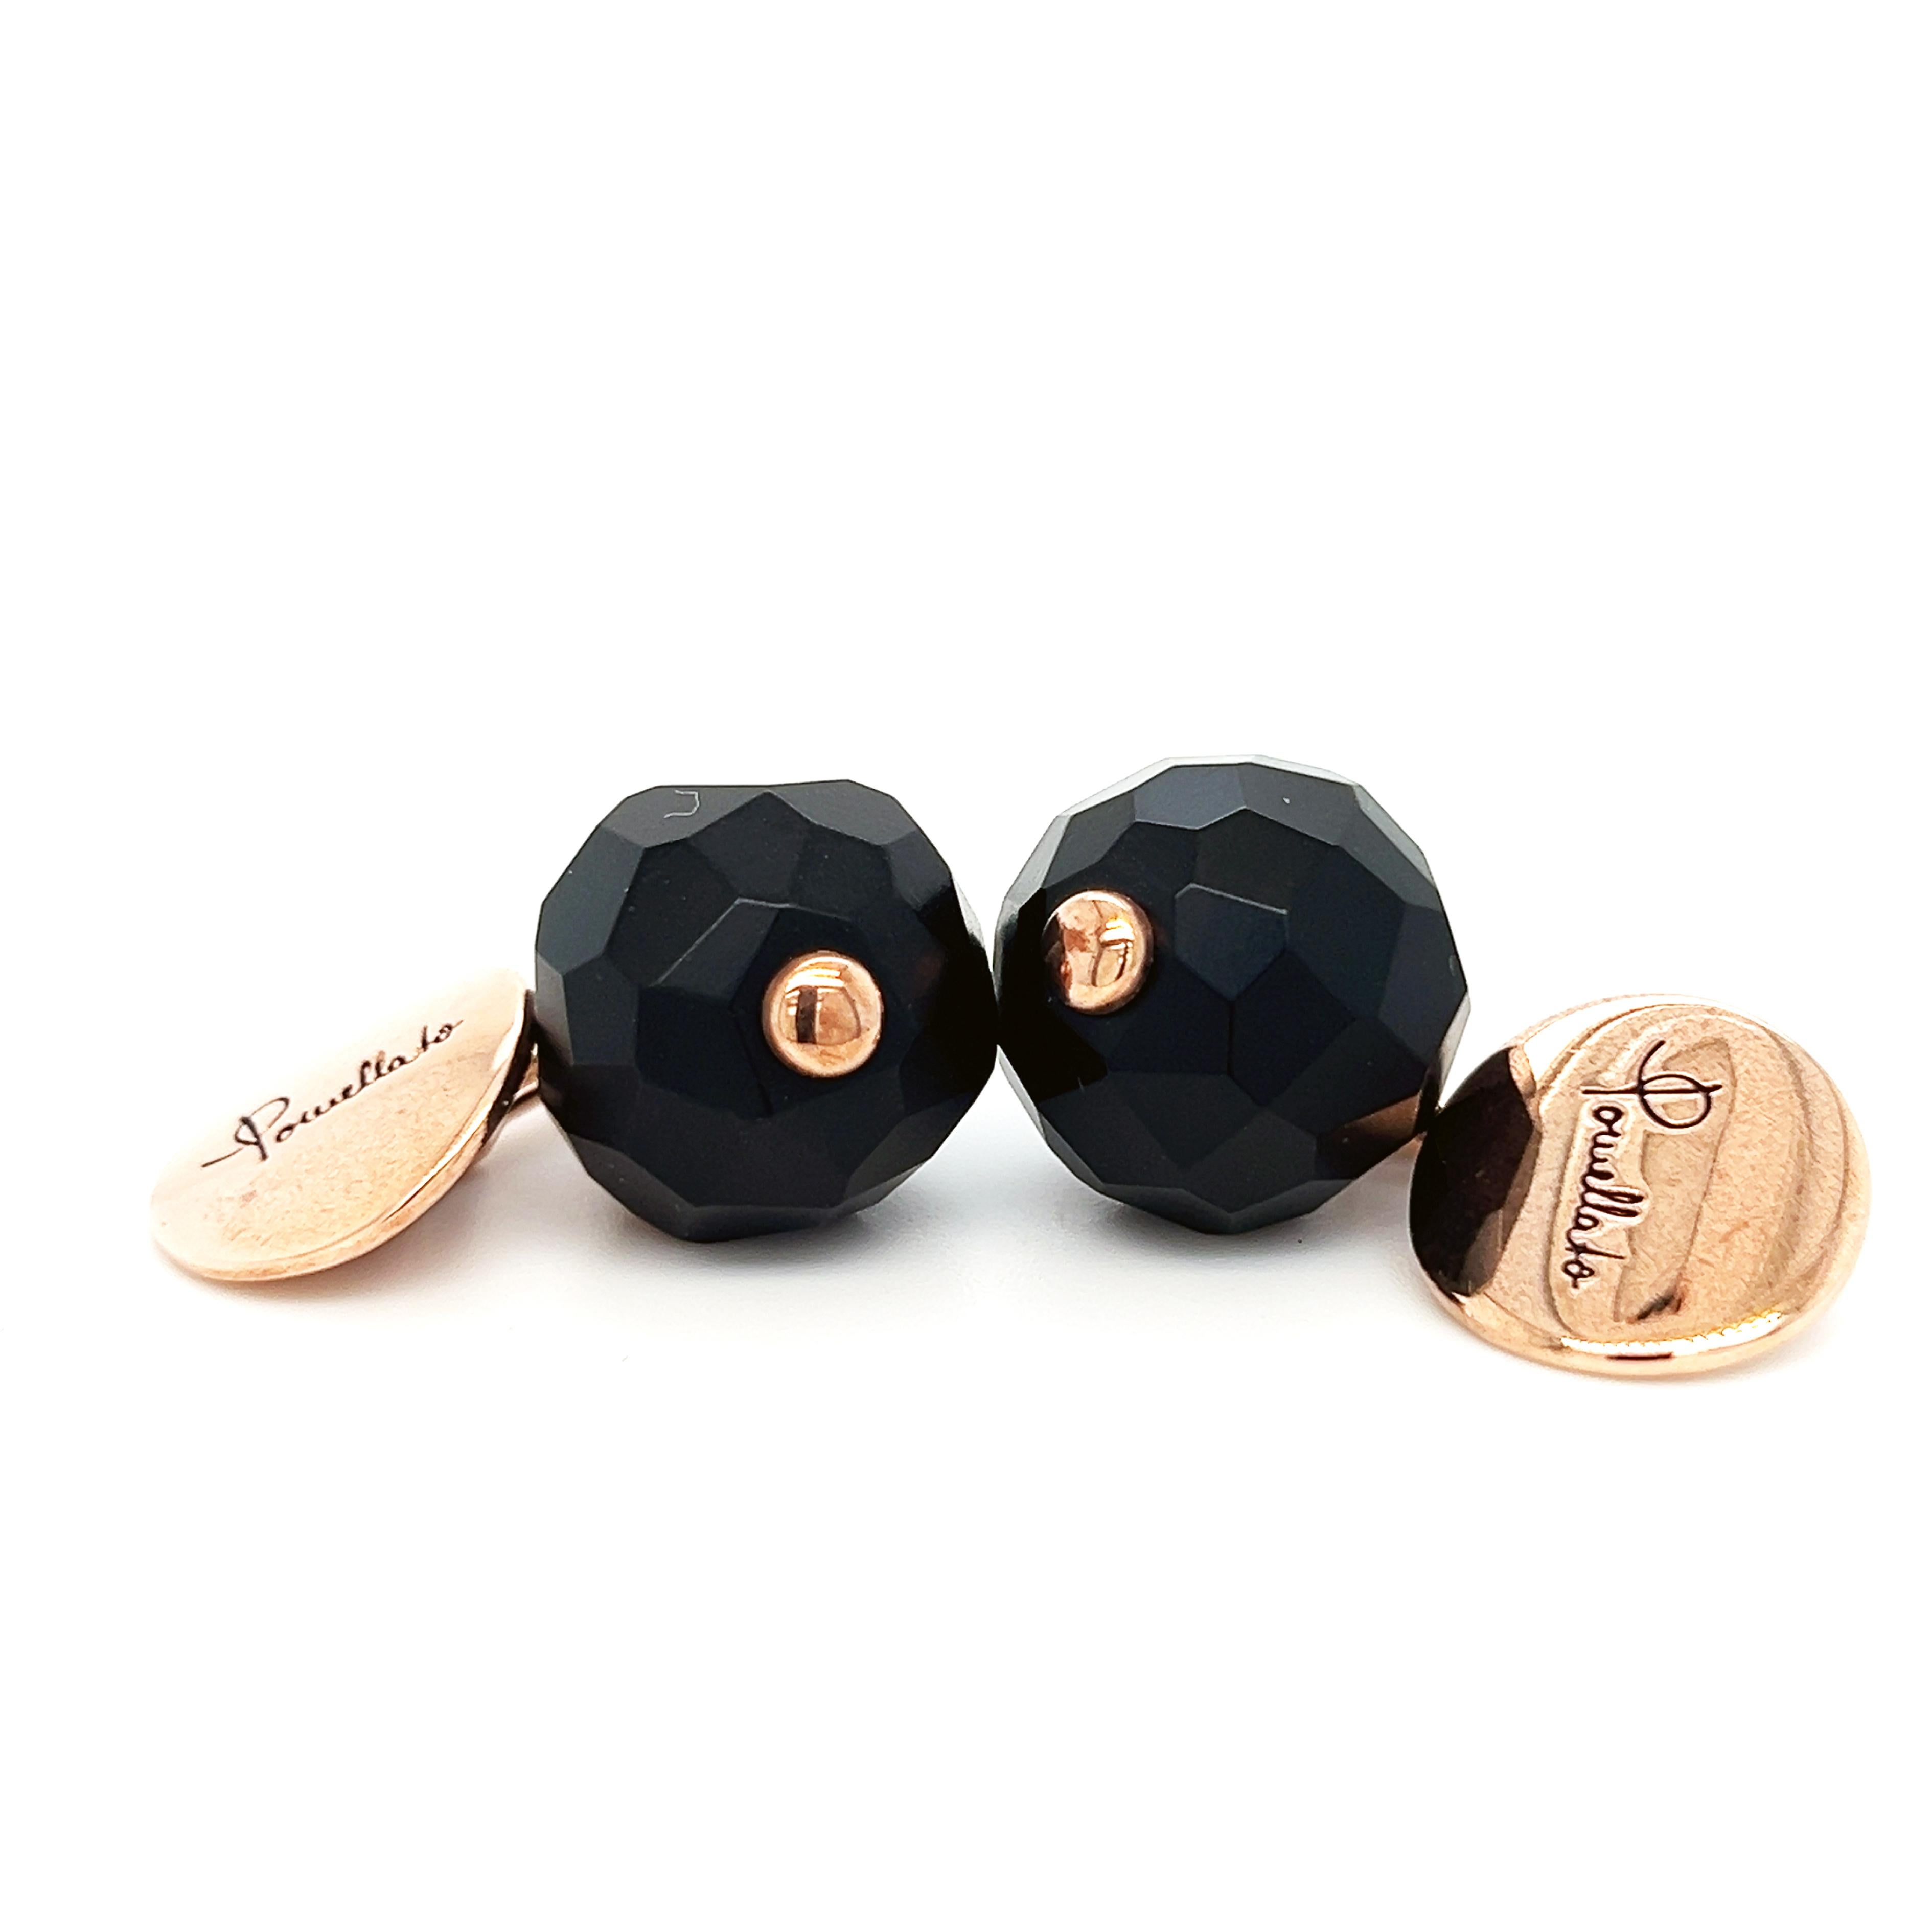 Original 2012 Iconic Pomellato Victoria Jet Faceted Ball Rose Gold Cufflinks For Sale 1